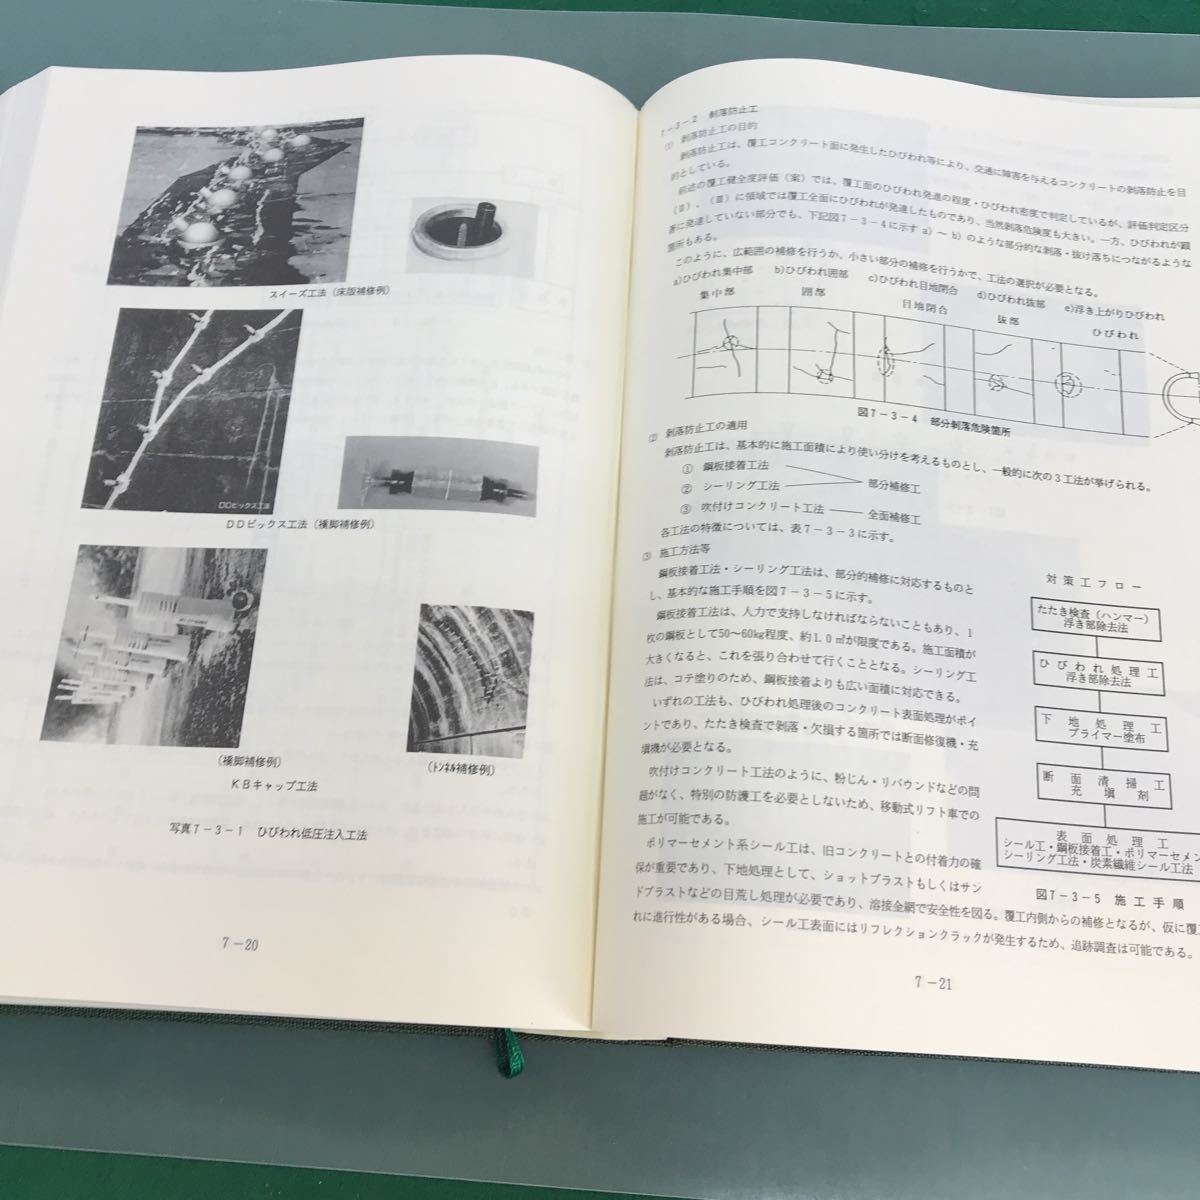 H04-019 road guarantee all technology hand book ( modified . version ) Heisei era 10 year road control technology research .